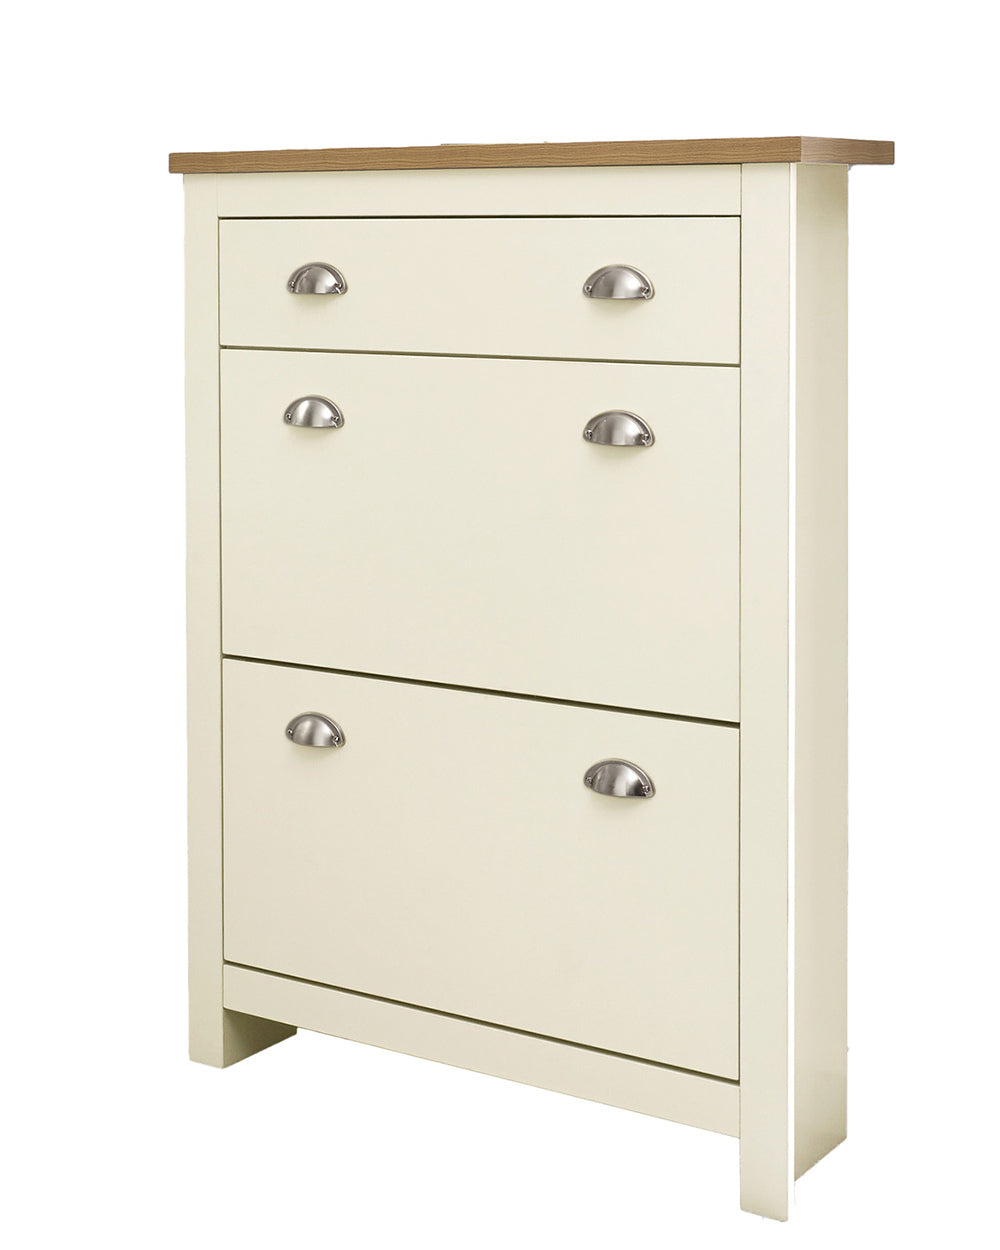 lancaster shoe storage cabinet in cream  on a white background setting.